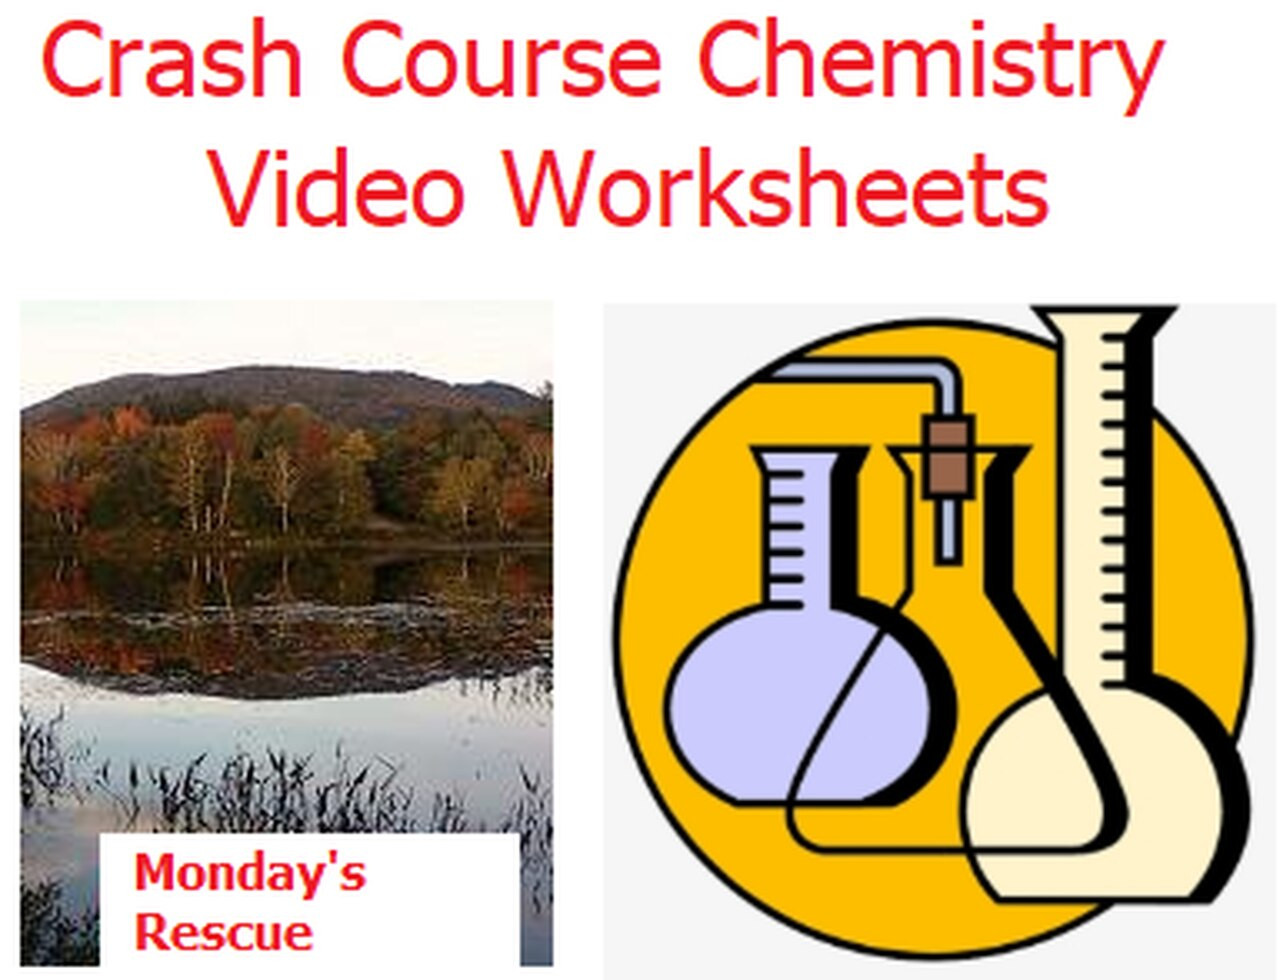 Crash Course Chemistry Video Worksheet 1: The Nucleus (Distance Learning)